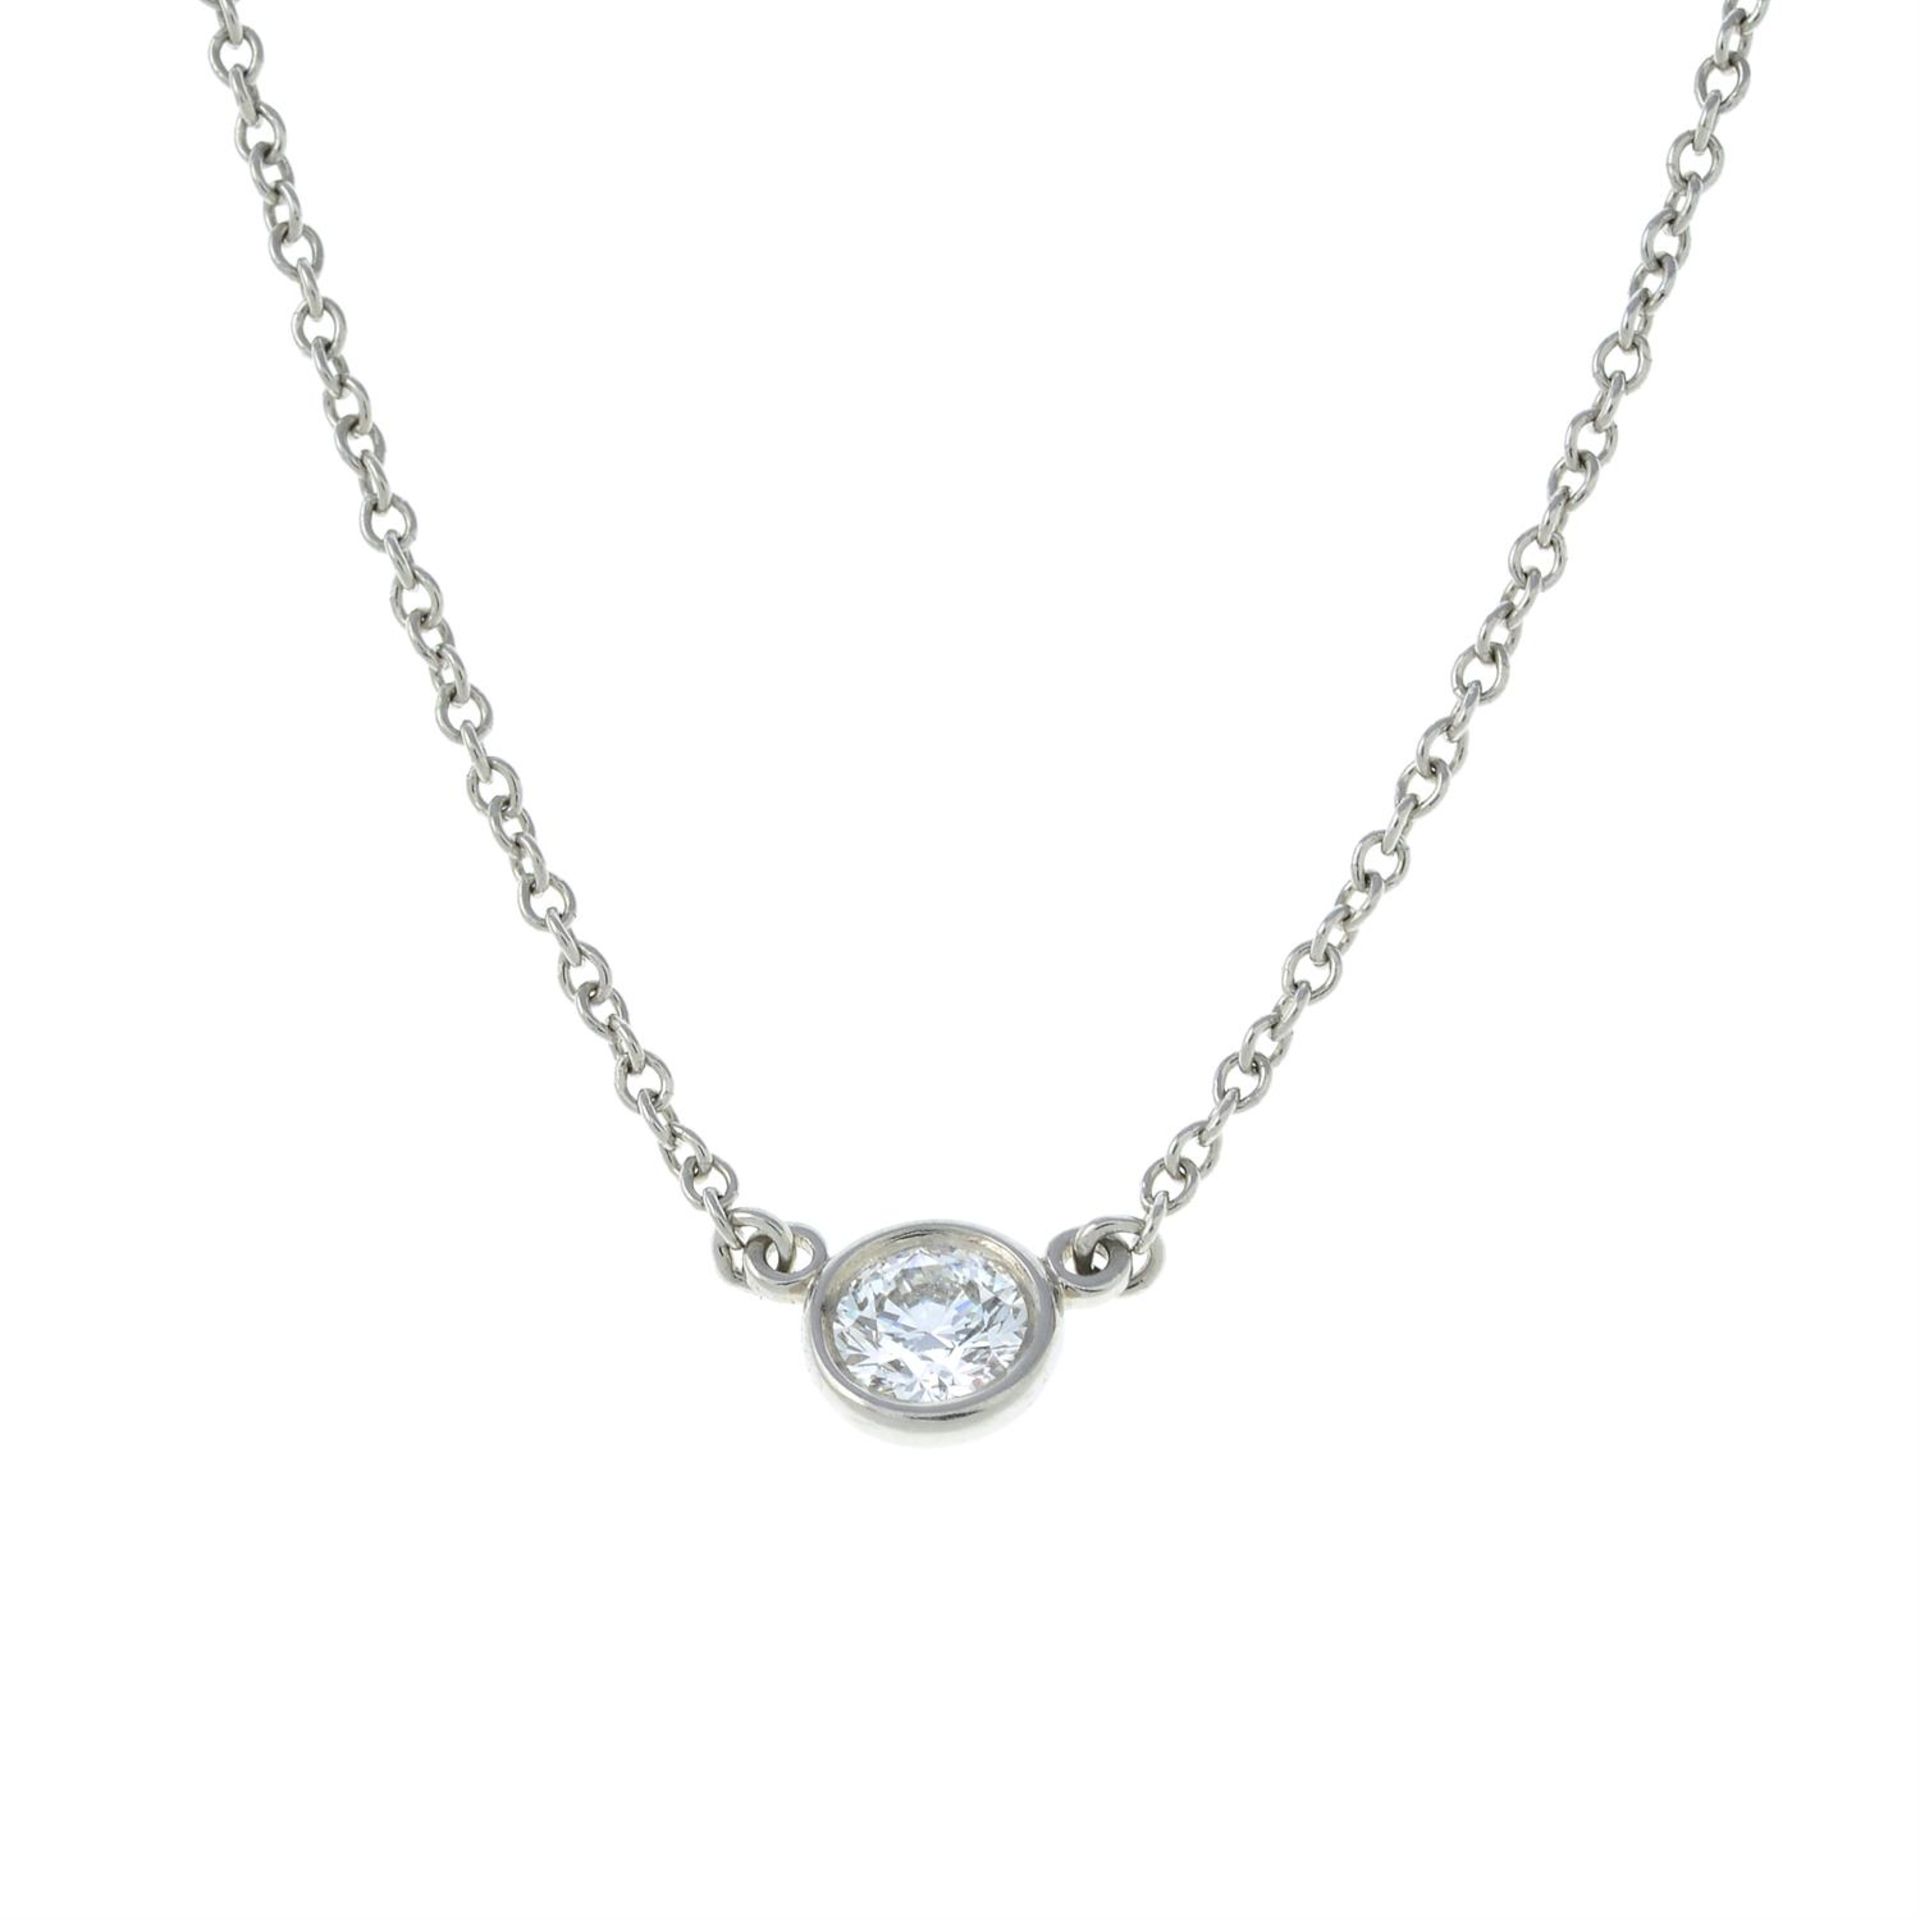 A 'Diamonds by the Yard' necklace, by Elsa Peretti, for Tiffany & Co.